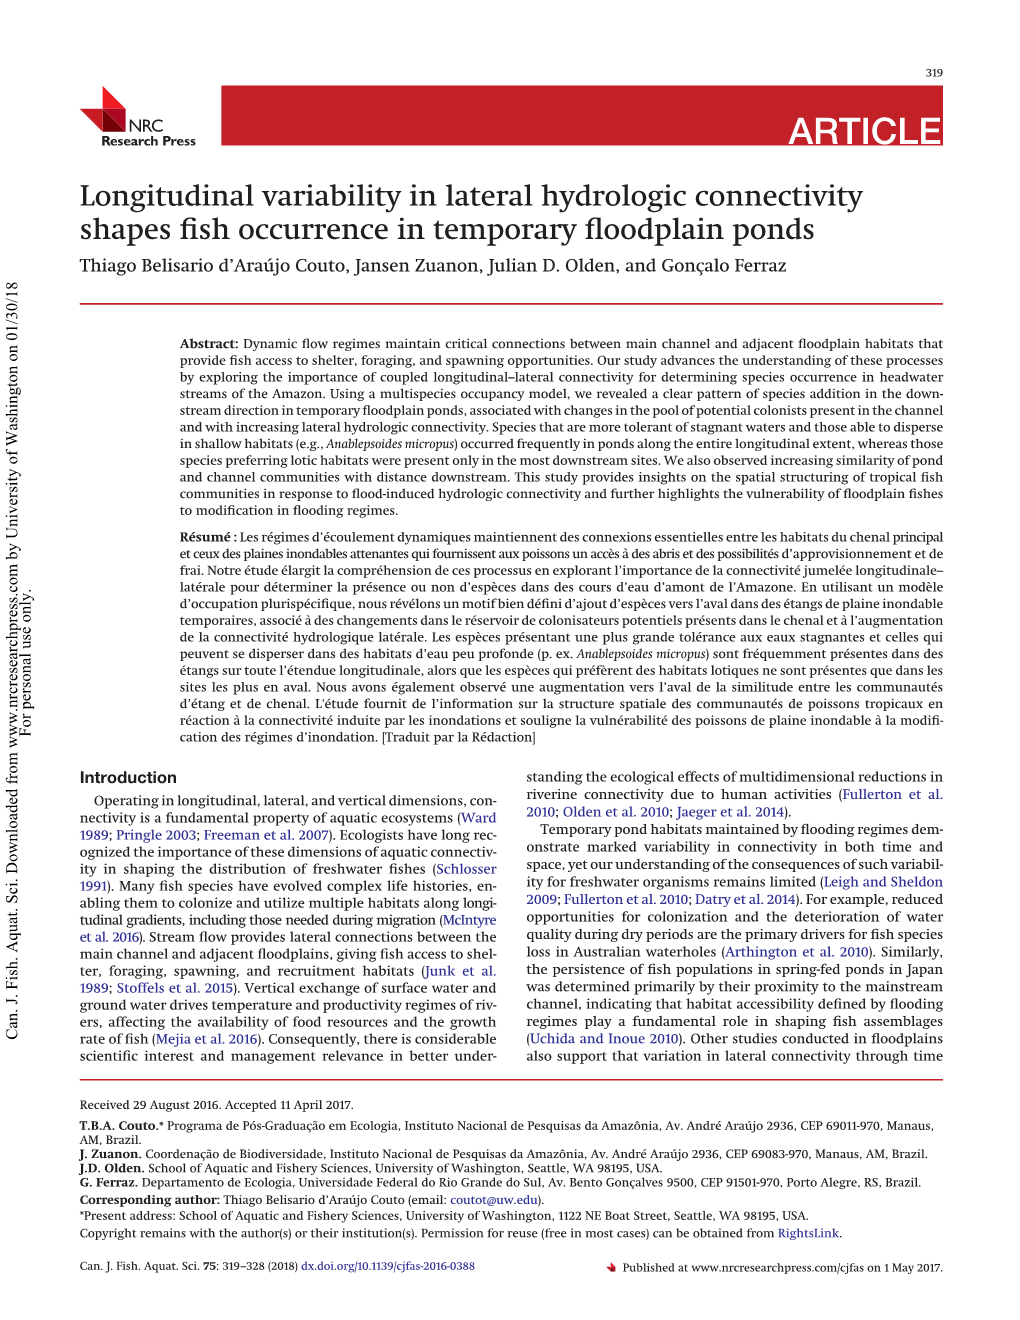 Longitudinal Variability in Lateral Hydrologic Connectivity Shapes Fish